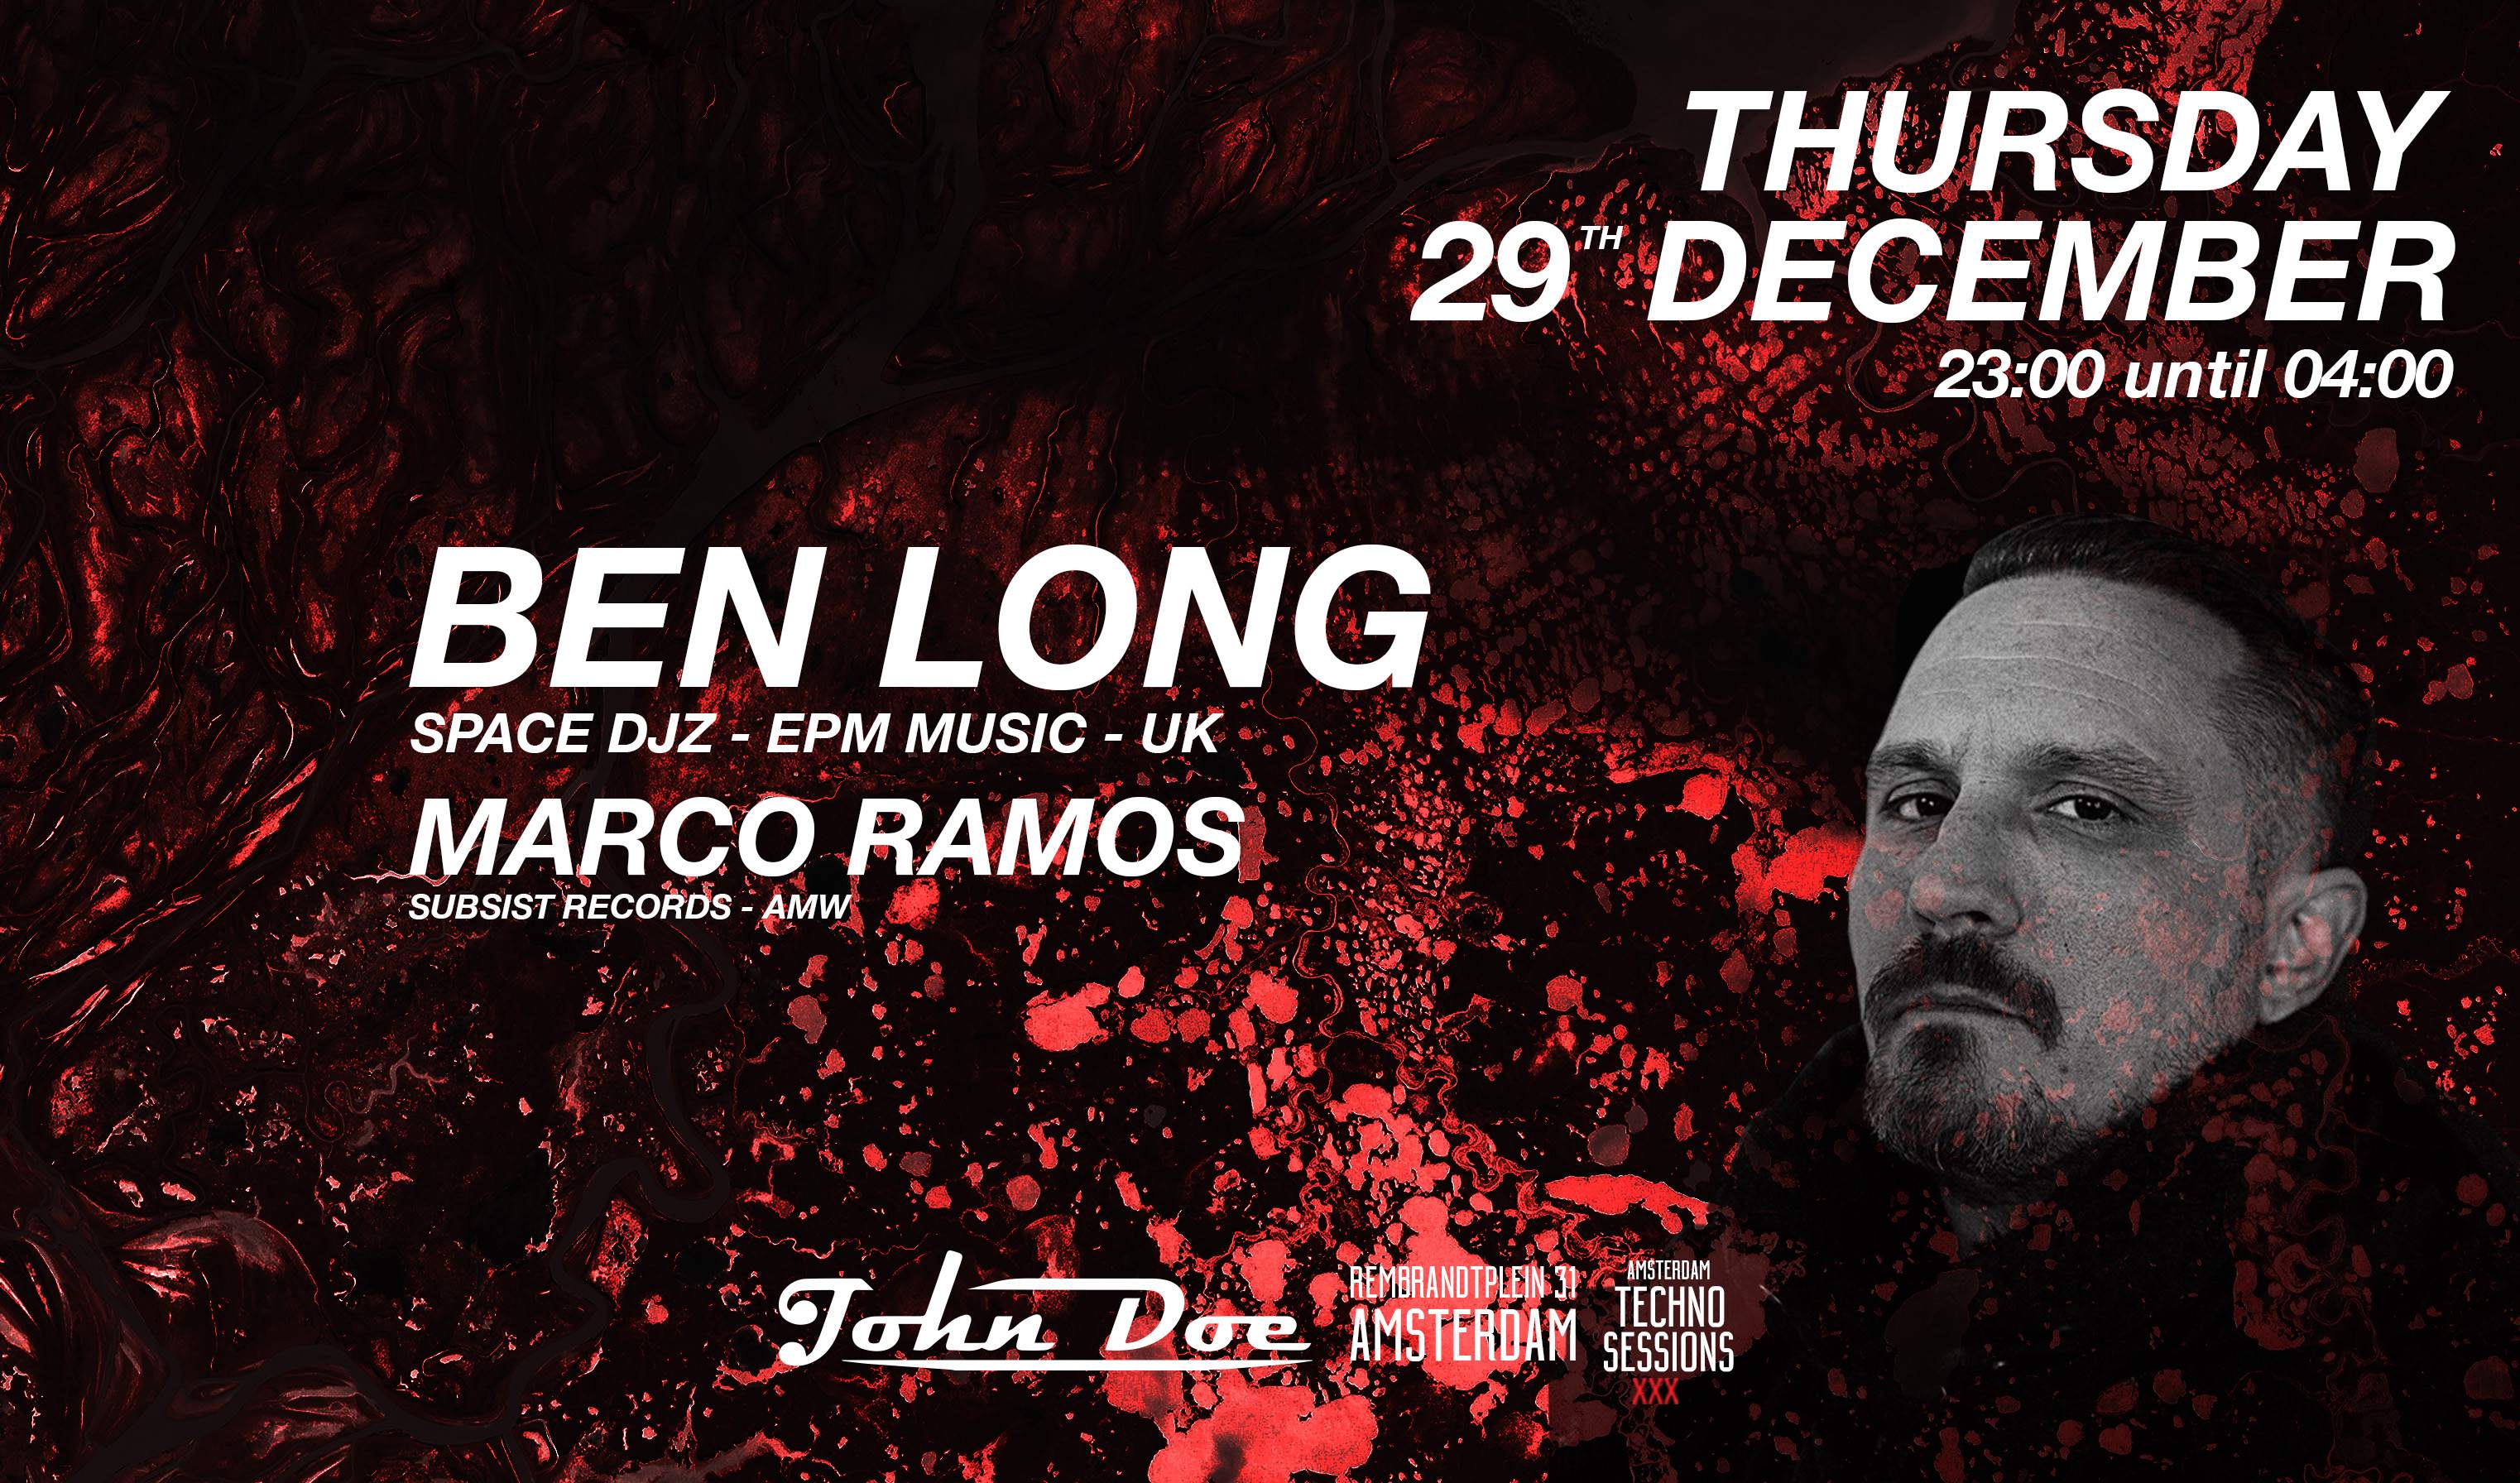 Amsterdam Techno Sessions with Ben Long (Space DJz - EPM Music) UK - Página frontal